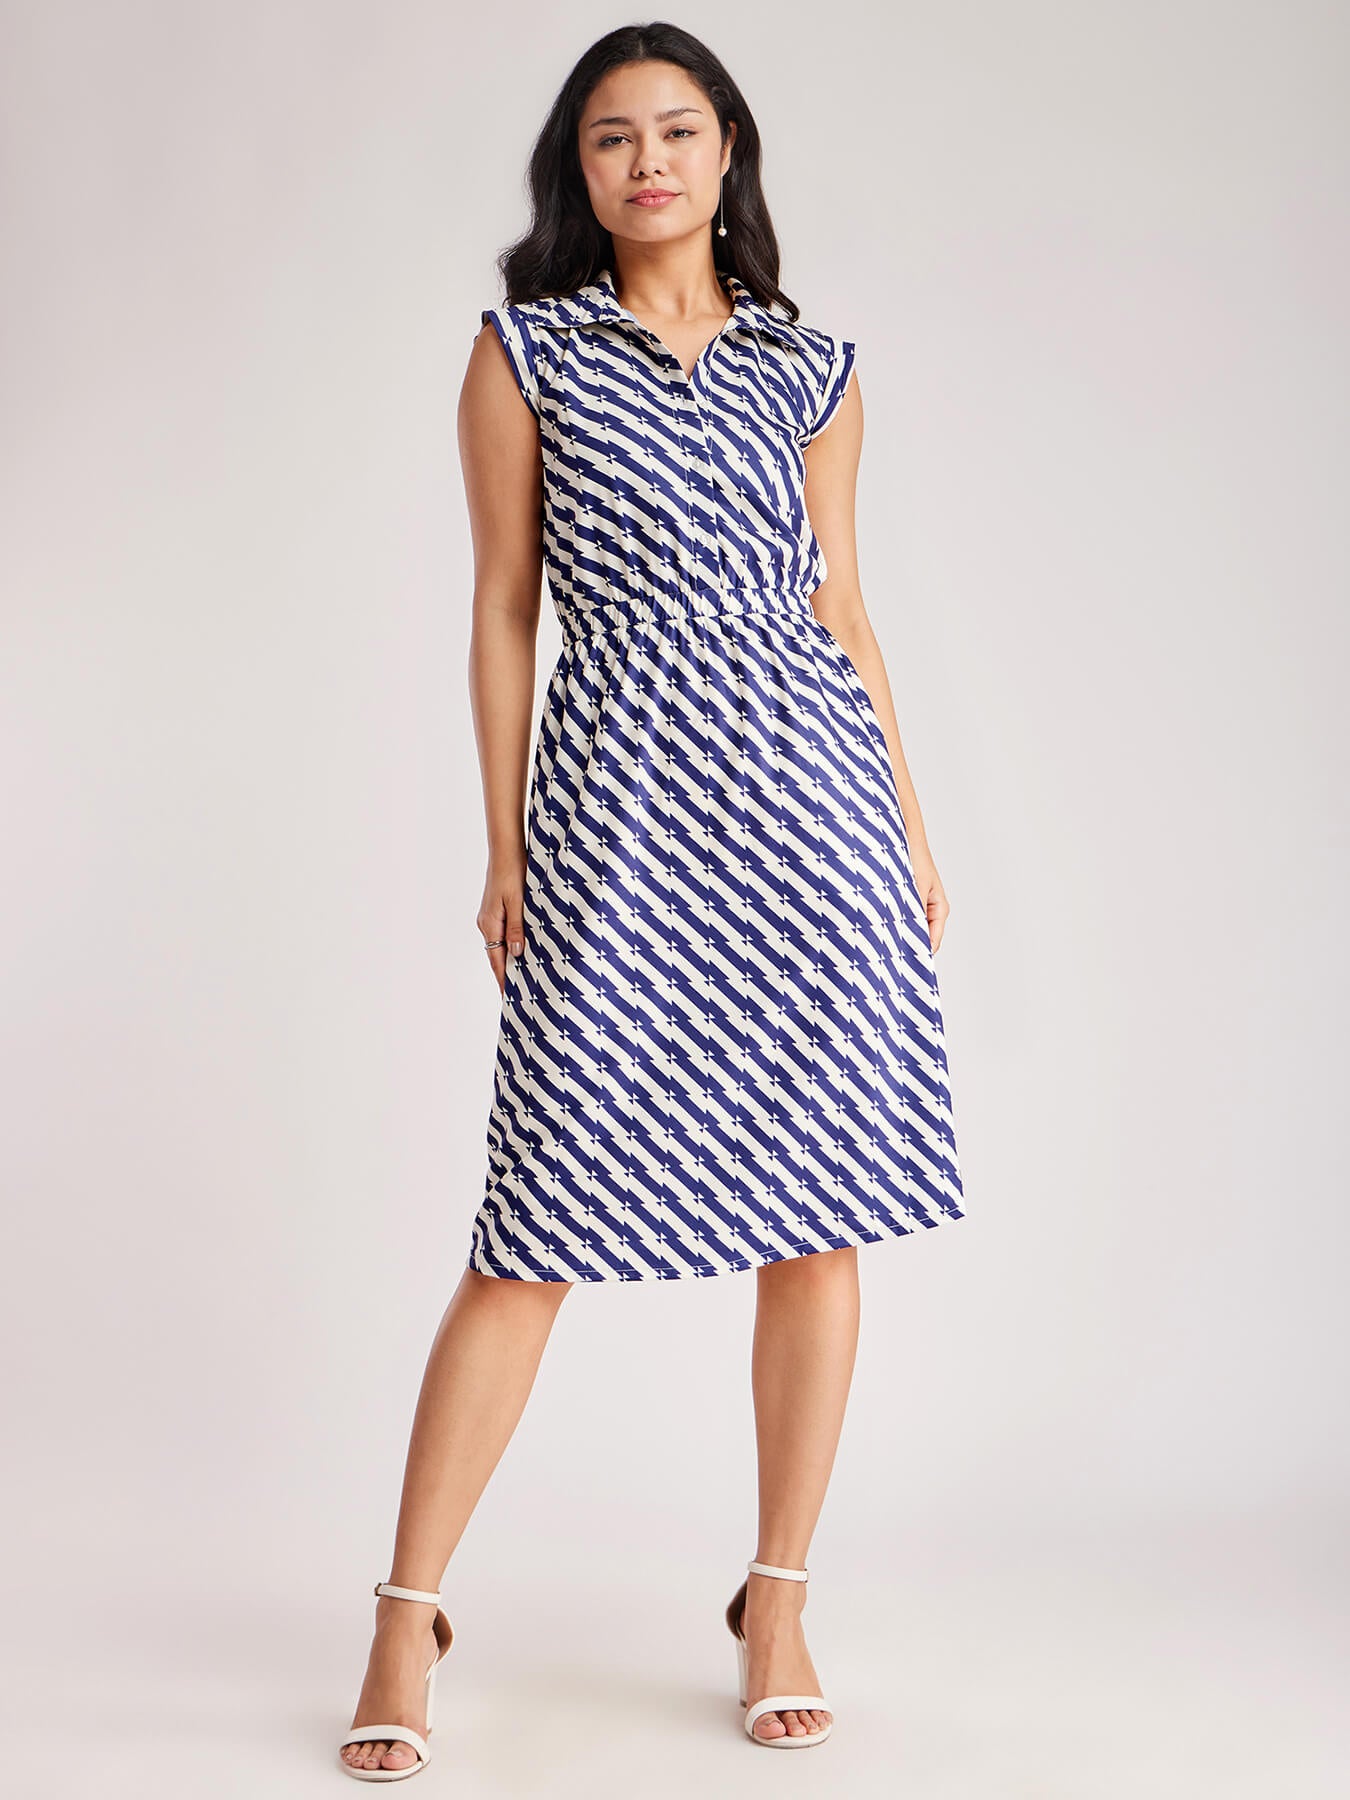 Elasticated Waist Collared Dress - Blue And Off White